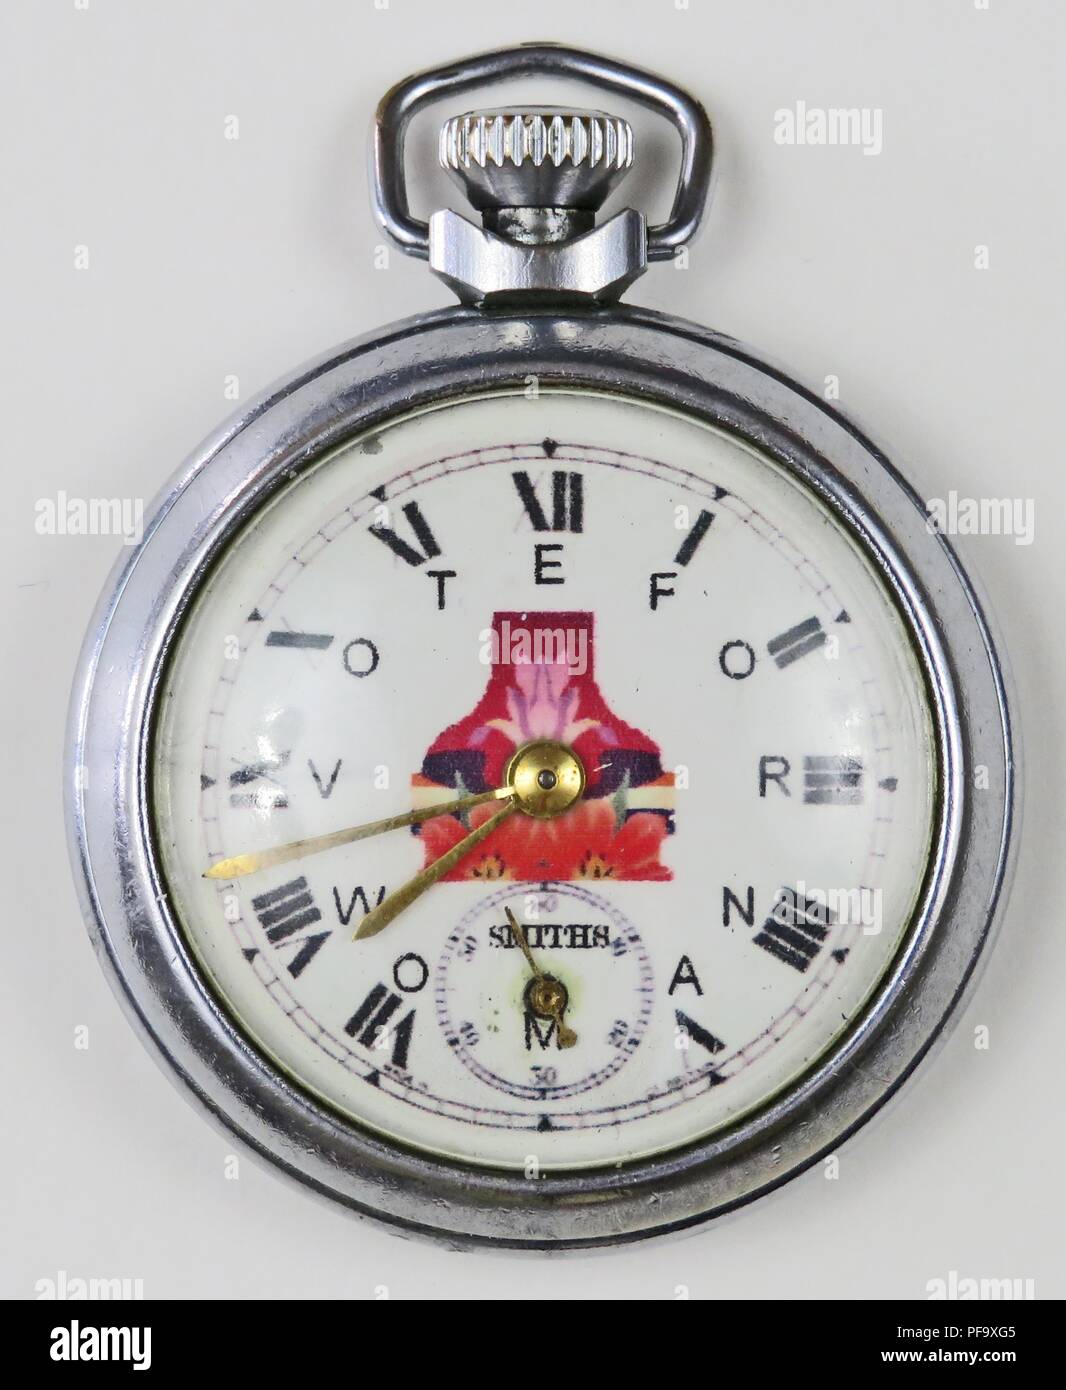 Silver-colored, pro-suffrage pocket watch or fob watch, with the phrase 'Vote for Woman,  with each letter corresponding to a Roman numeral, and a red floral design in the center of the enamel face, labeled 'Smiths', 1900. Photography by Emilia van Beugen. () Stock Photo